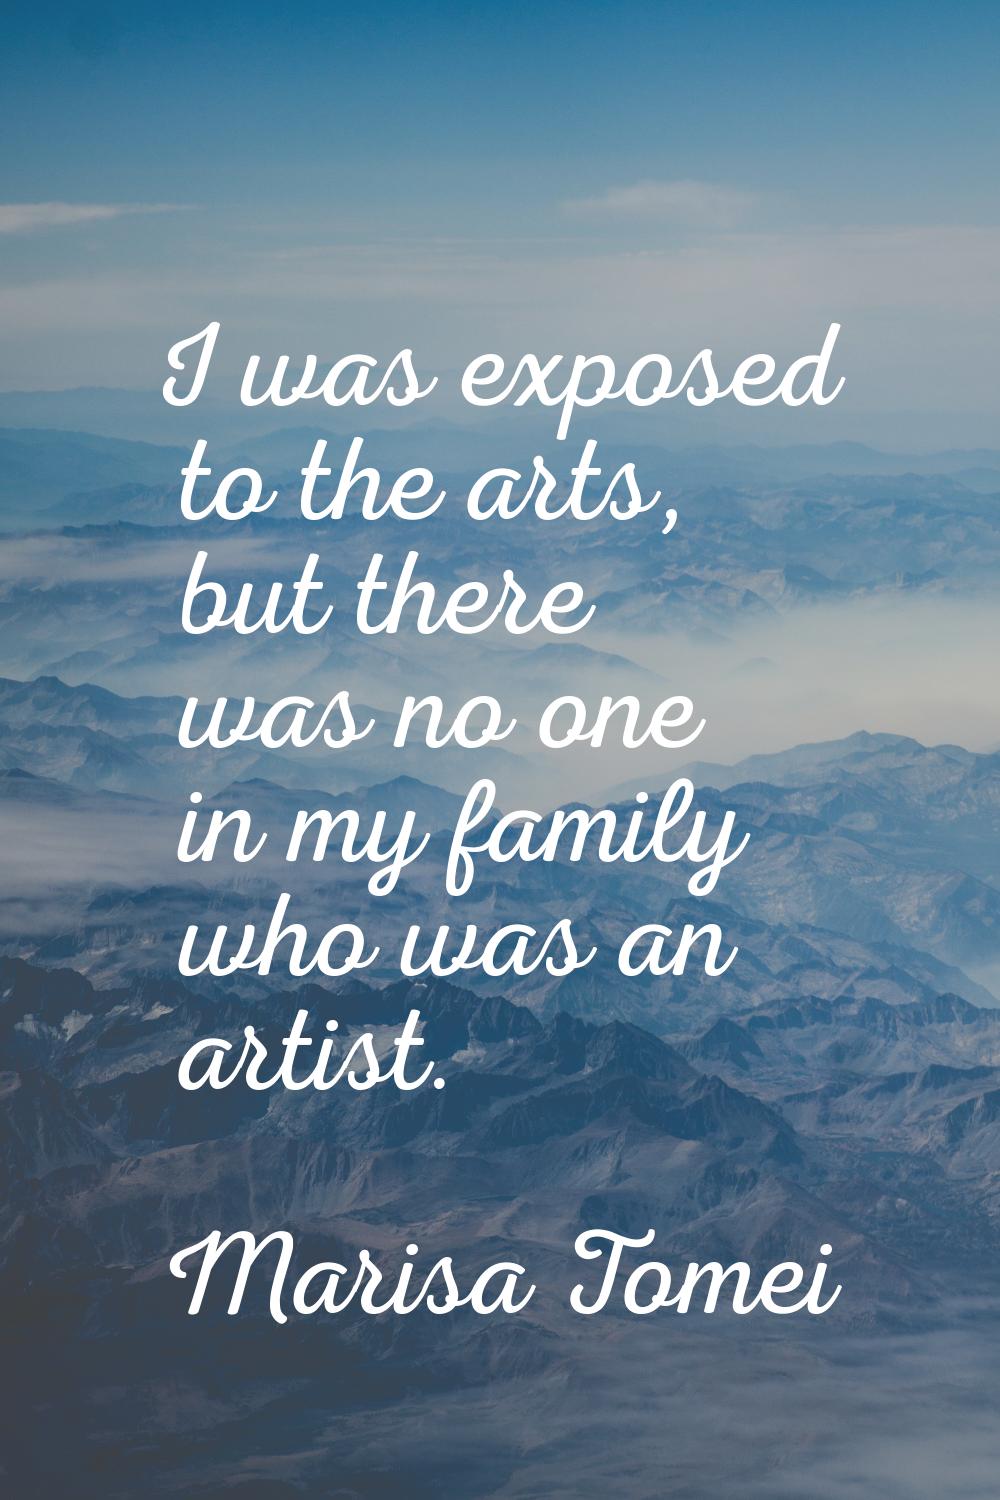 I was exposed to the arts, but there was no one in my family who was an artist.